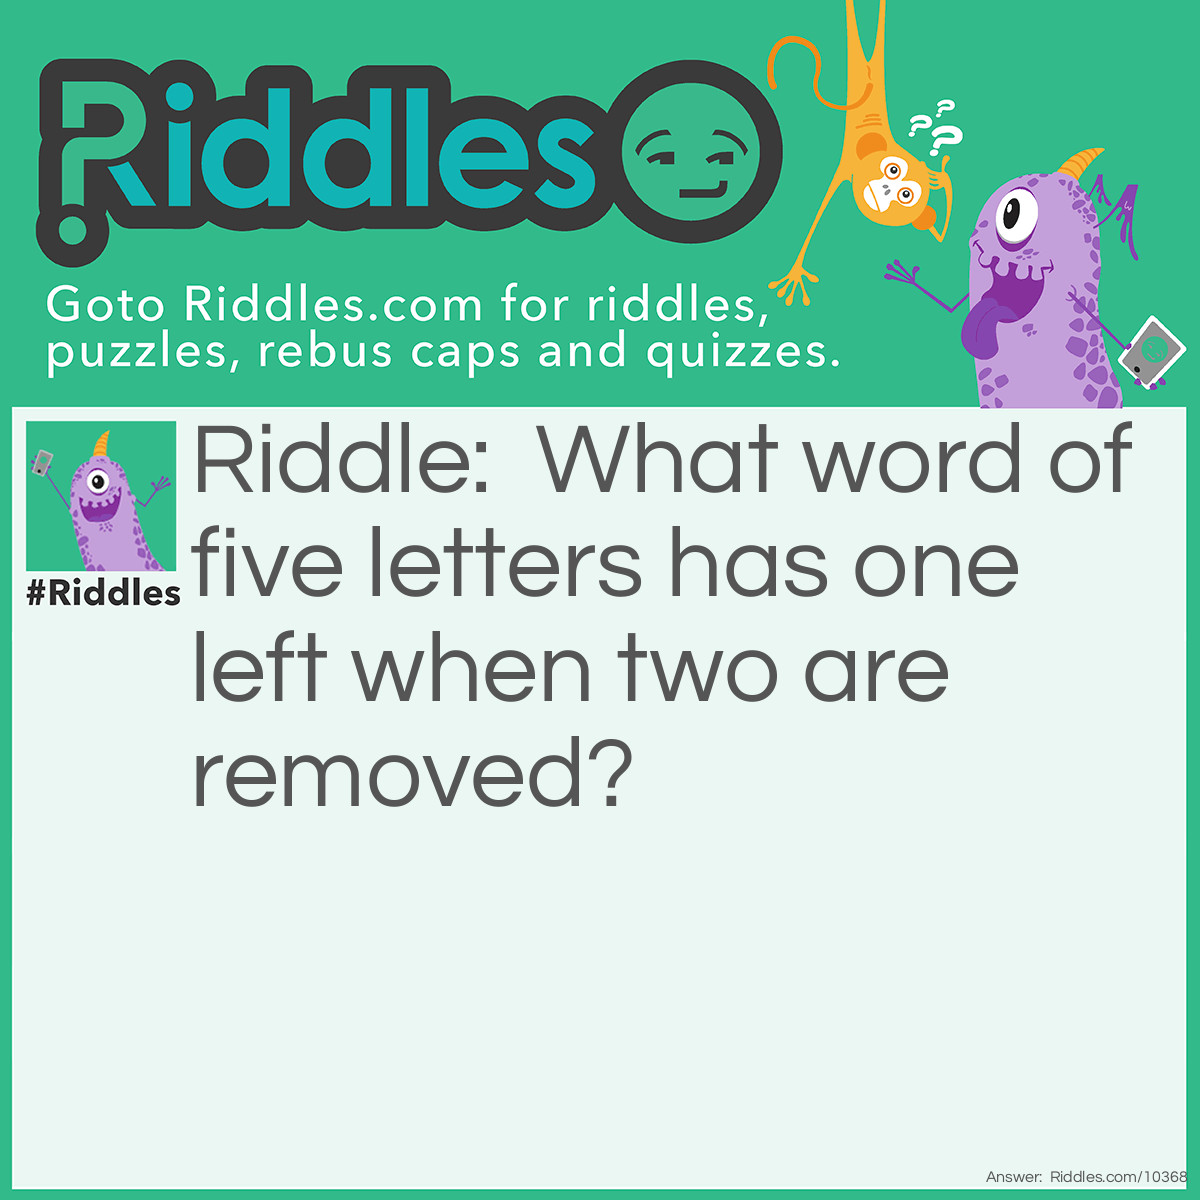 Riddle: What word of five letters has one left when two are removed? Answer: Stone.